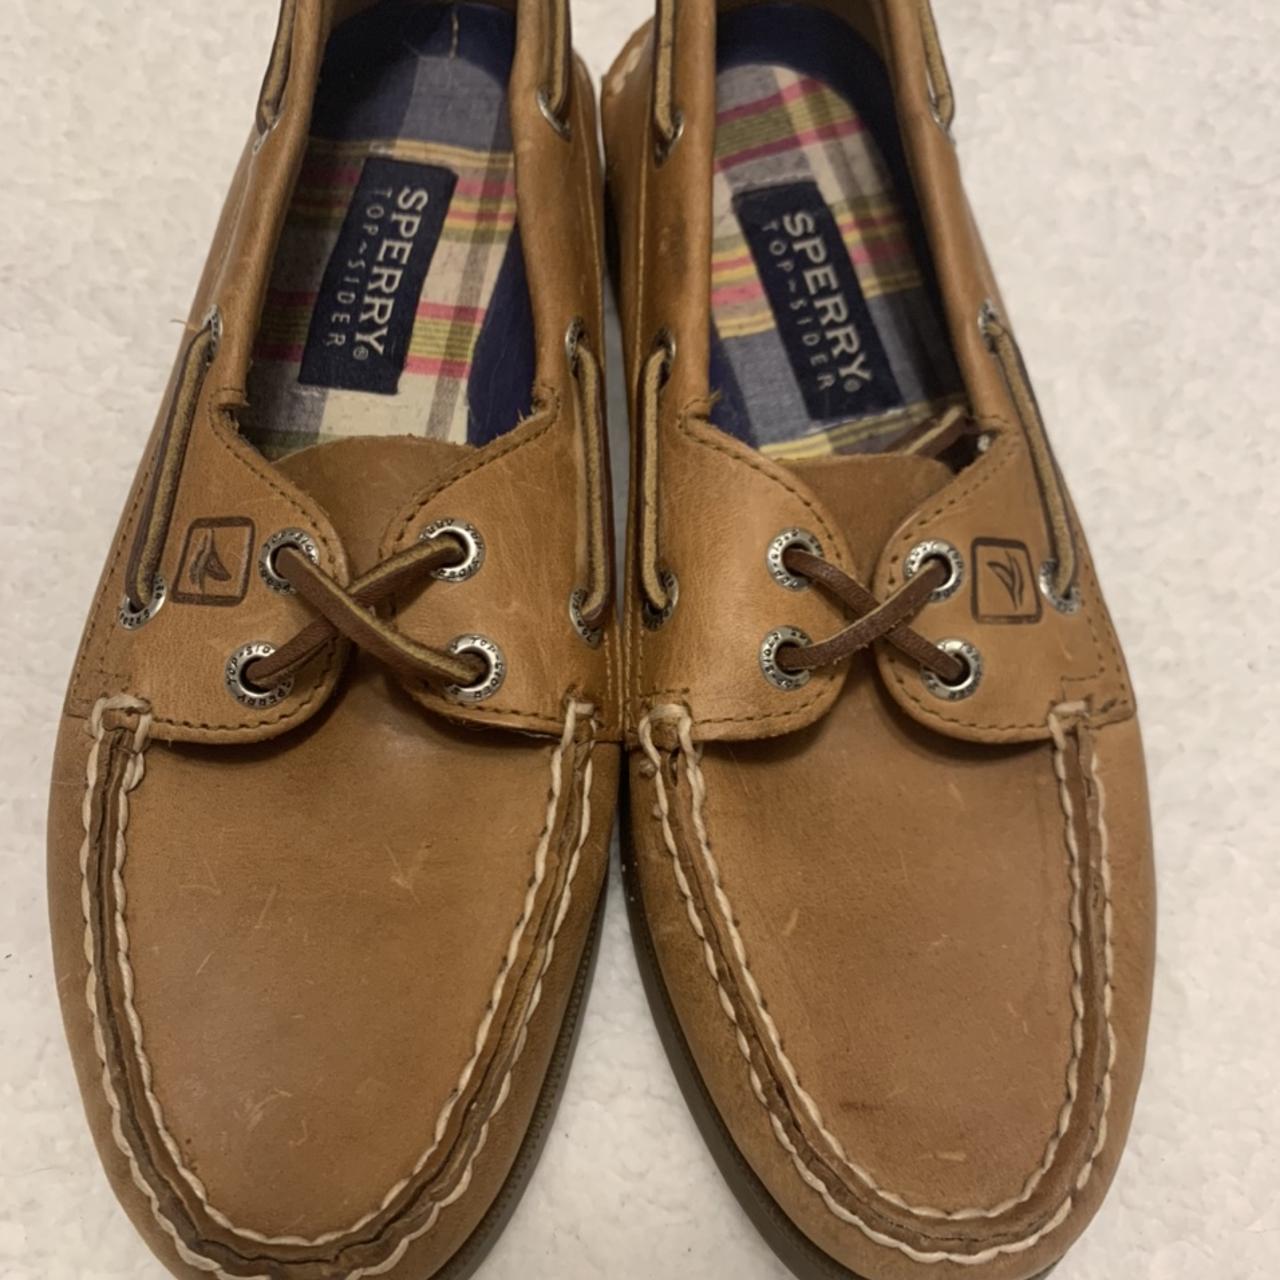 Sperry Women's Brown and Tan Loafers